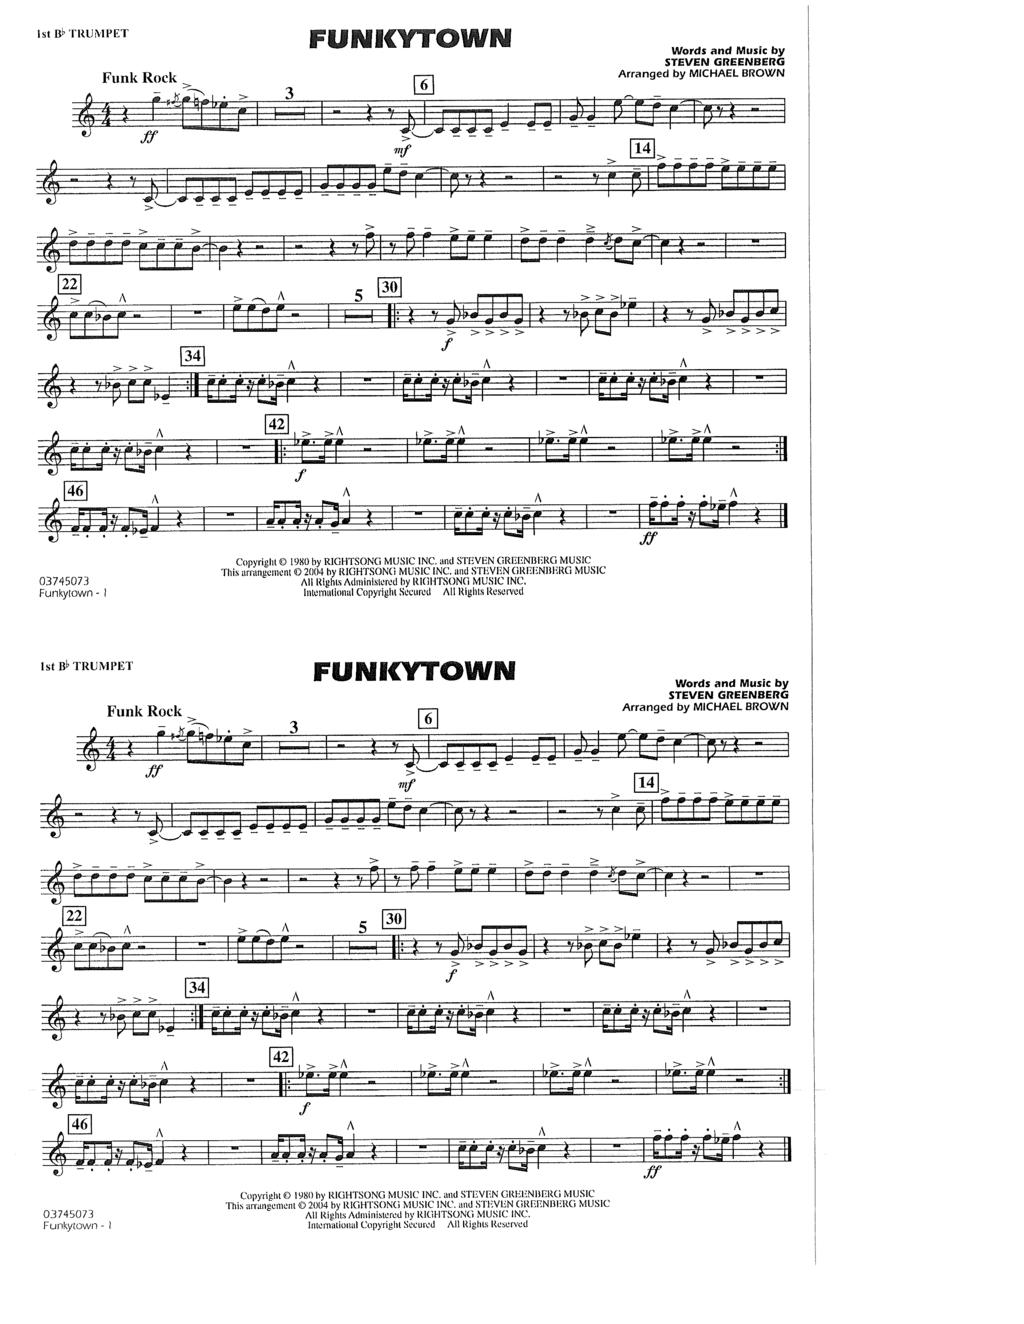 1st Bl> TRUMPET FUWICWOWW Words and Mu ic by Copyri ht 1980 by RIGHTSONG MUSIC INC. and MUSIC This arrangement 2004 by RIGHTSONG MUSIC INC.